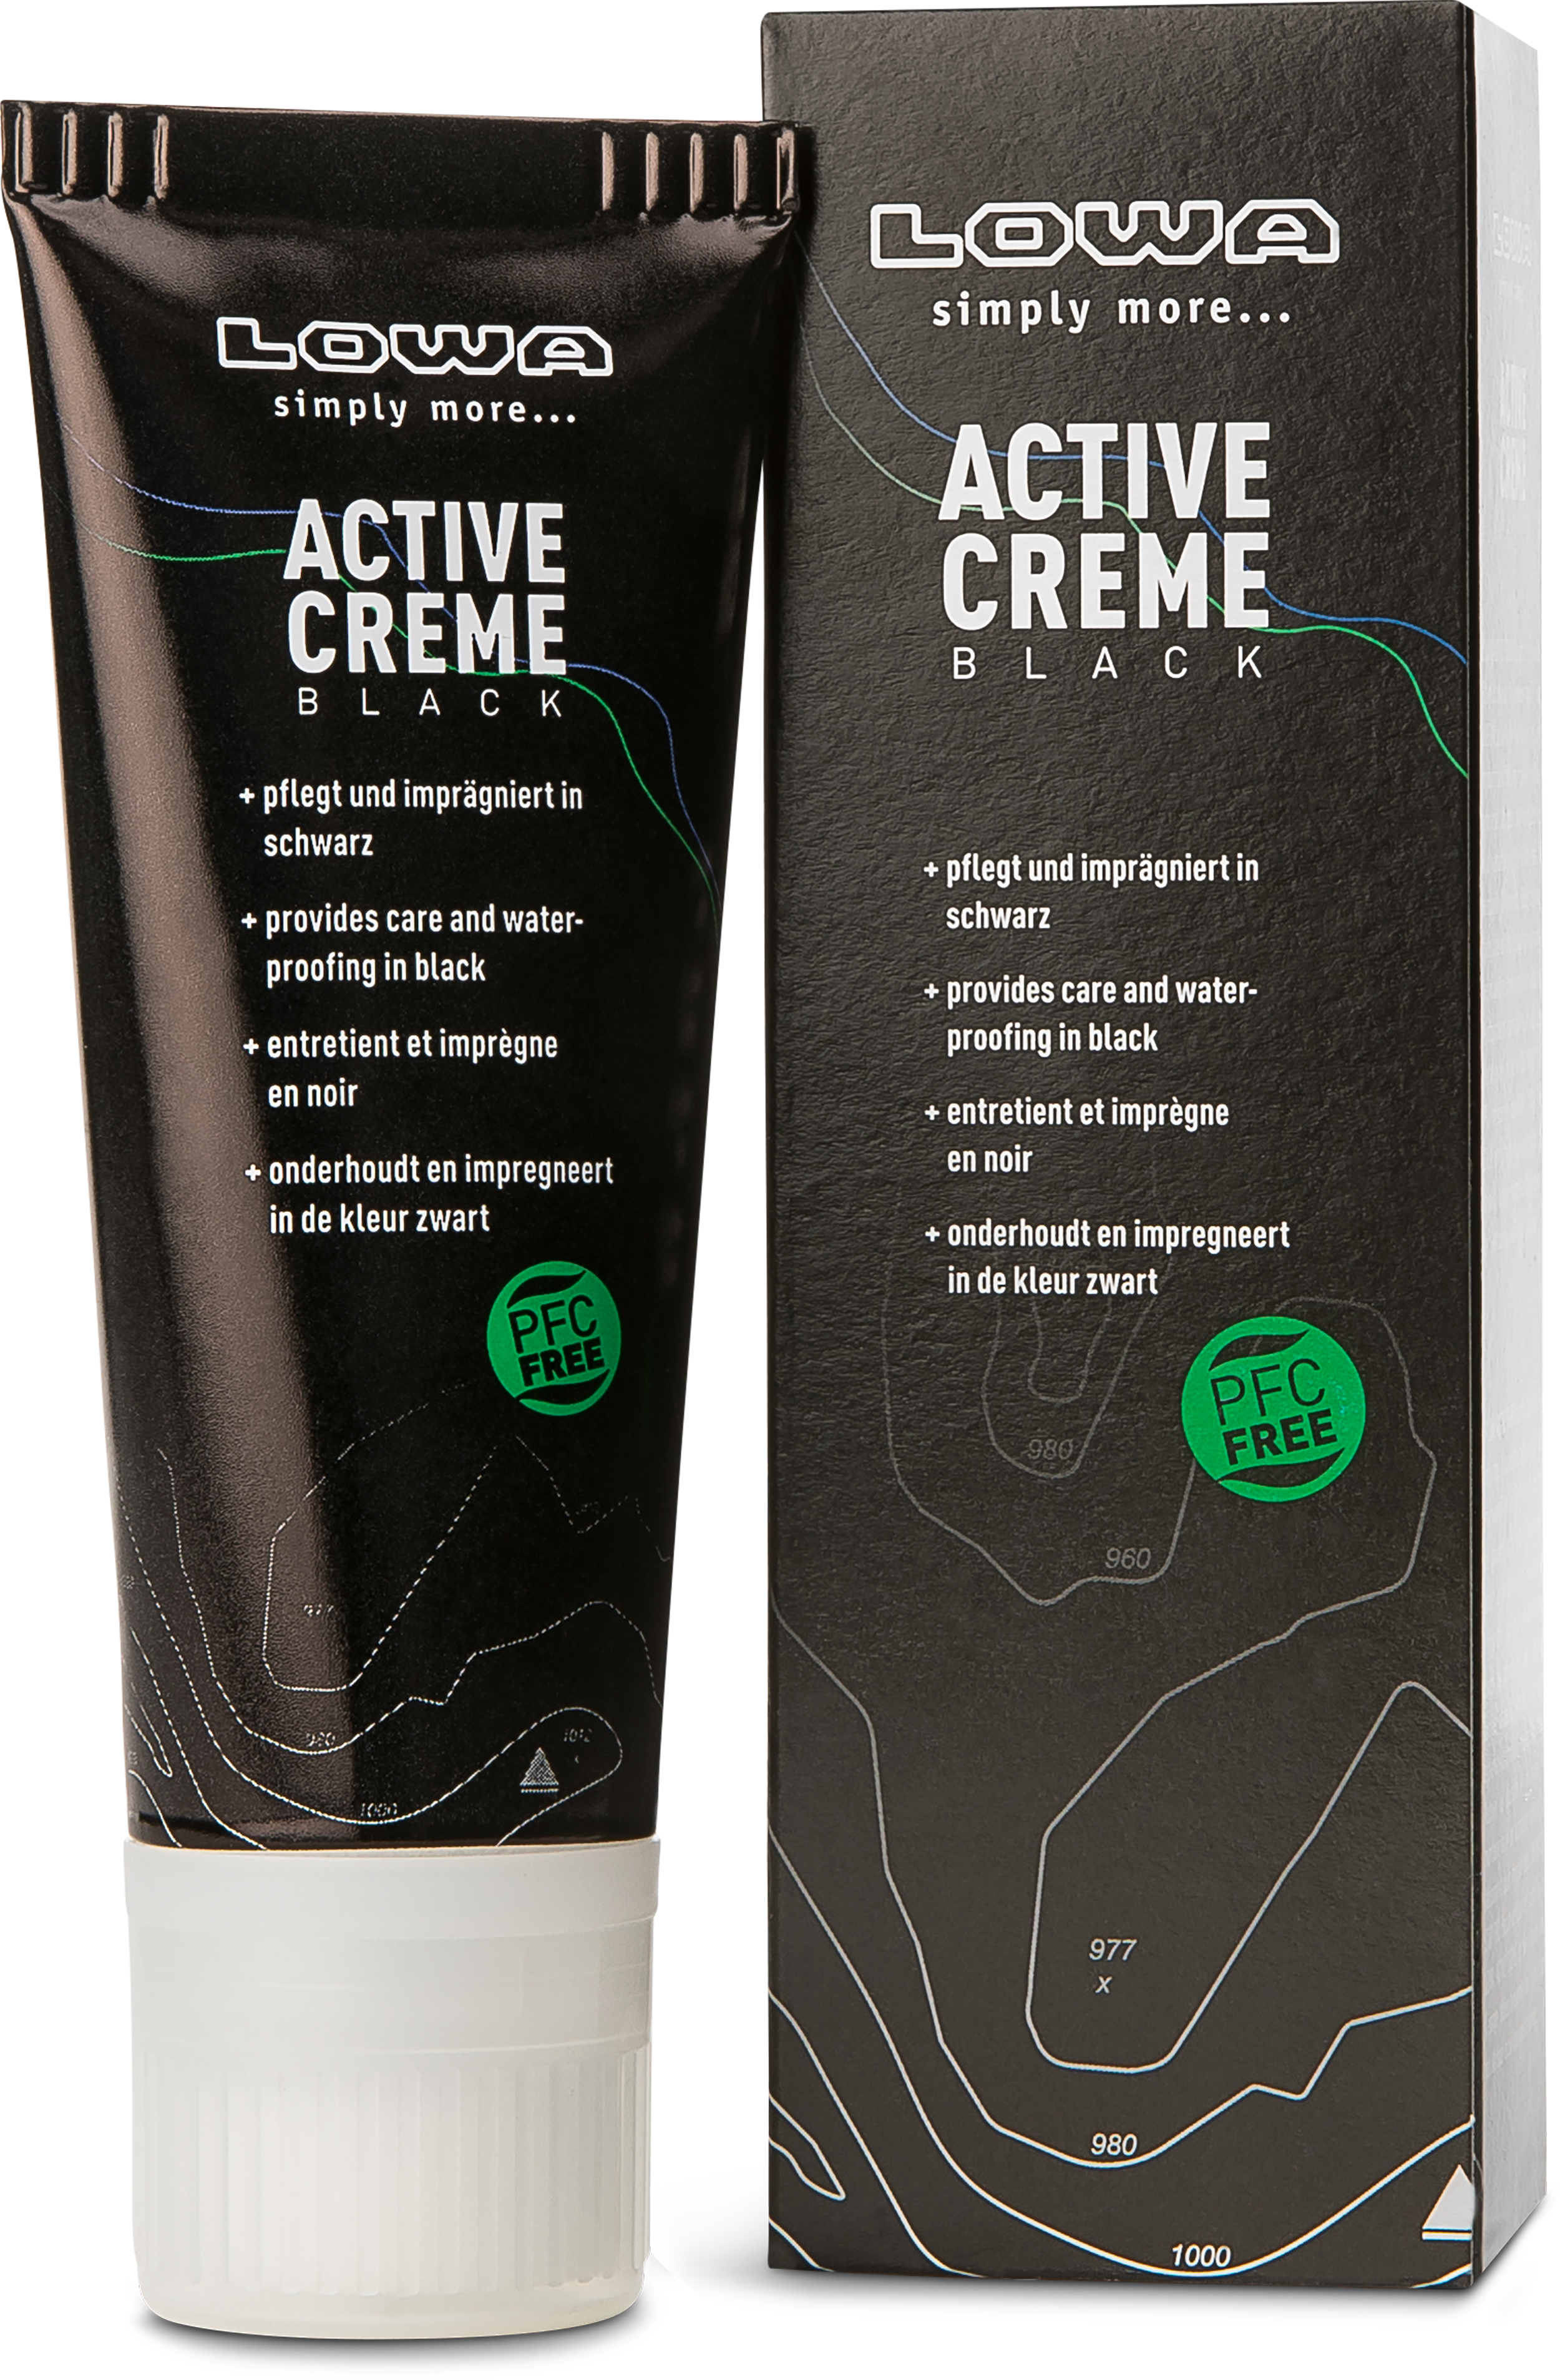 Afname dikte inval ACTIVE CREME 75ml: CARE | LOWA LV